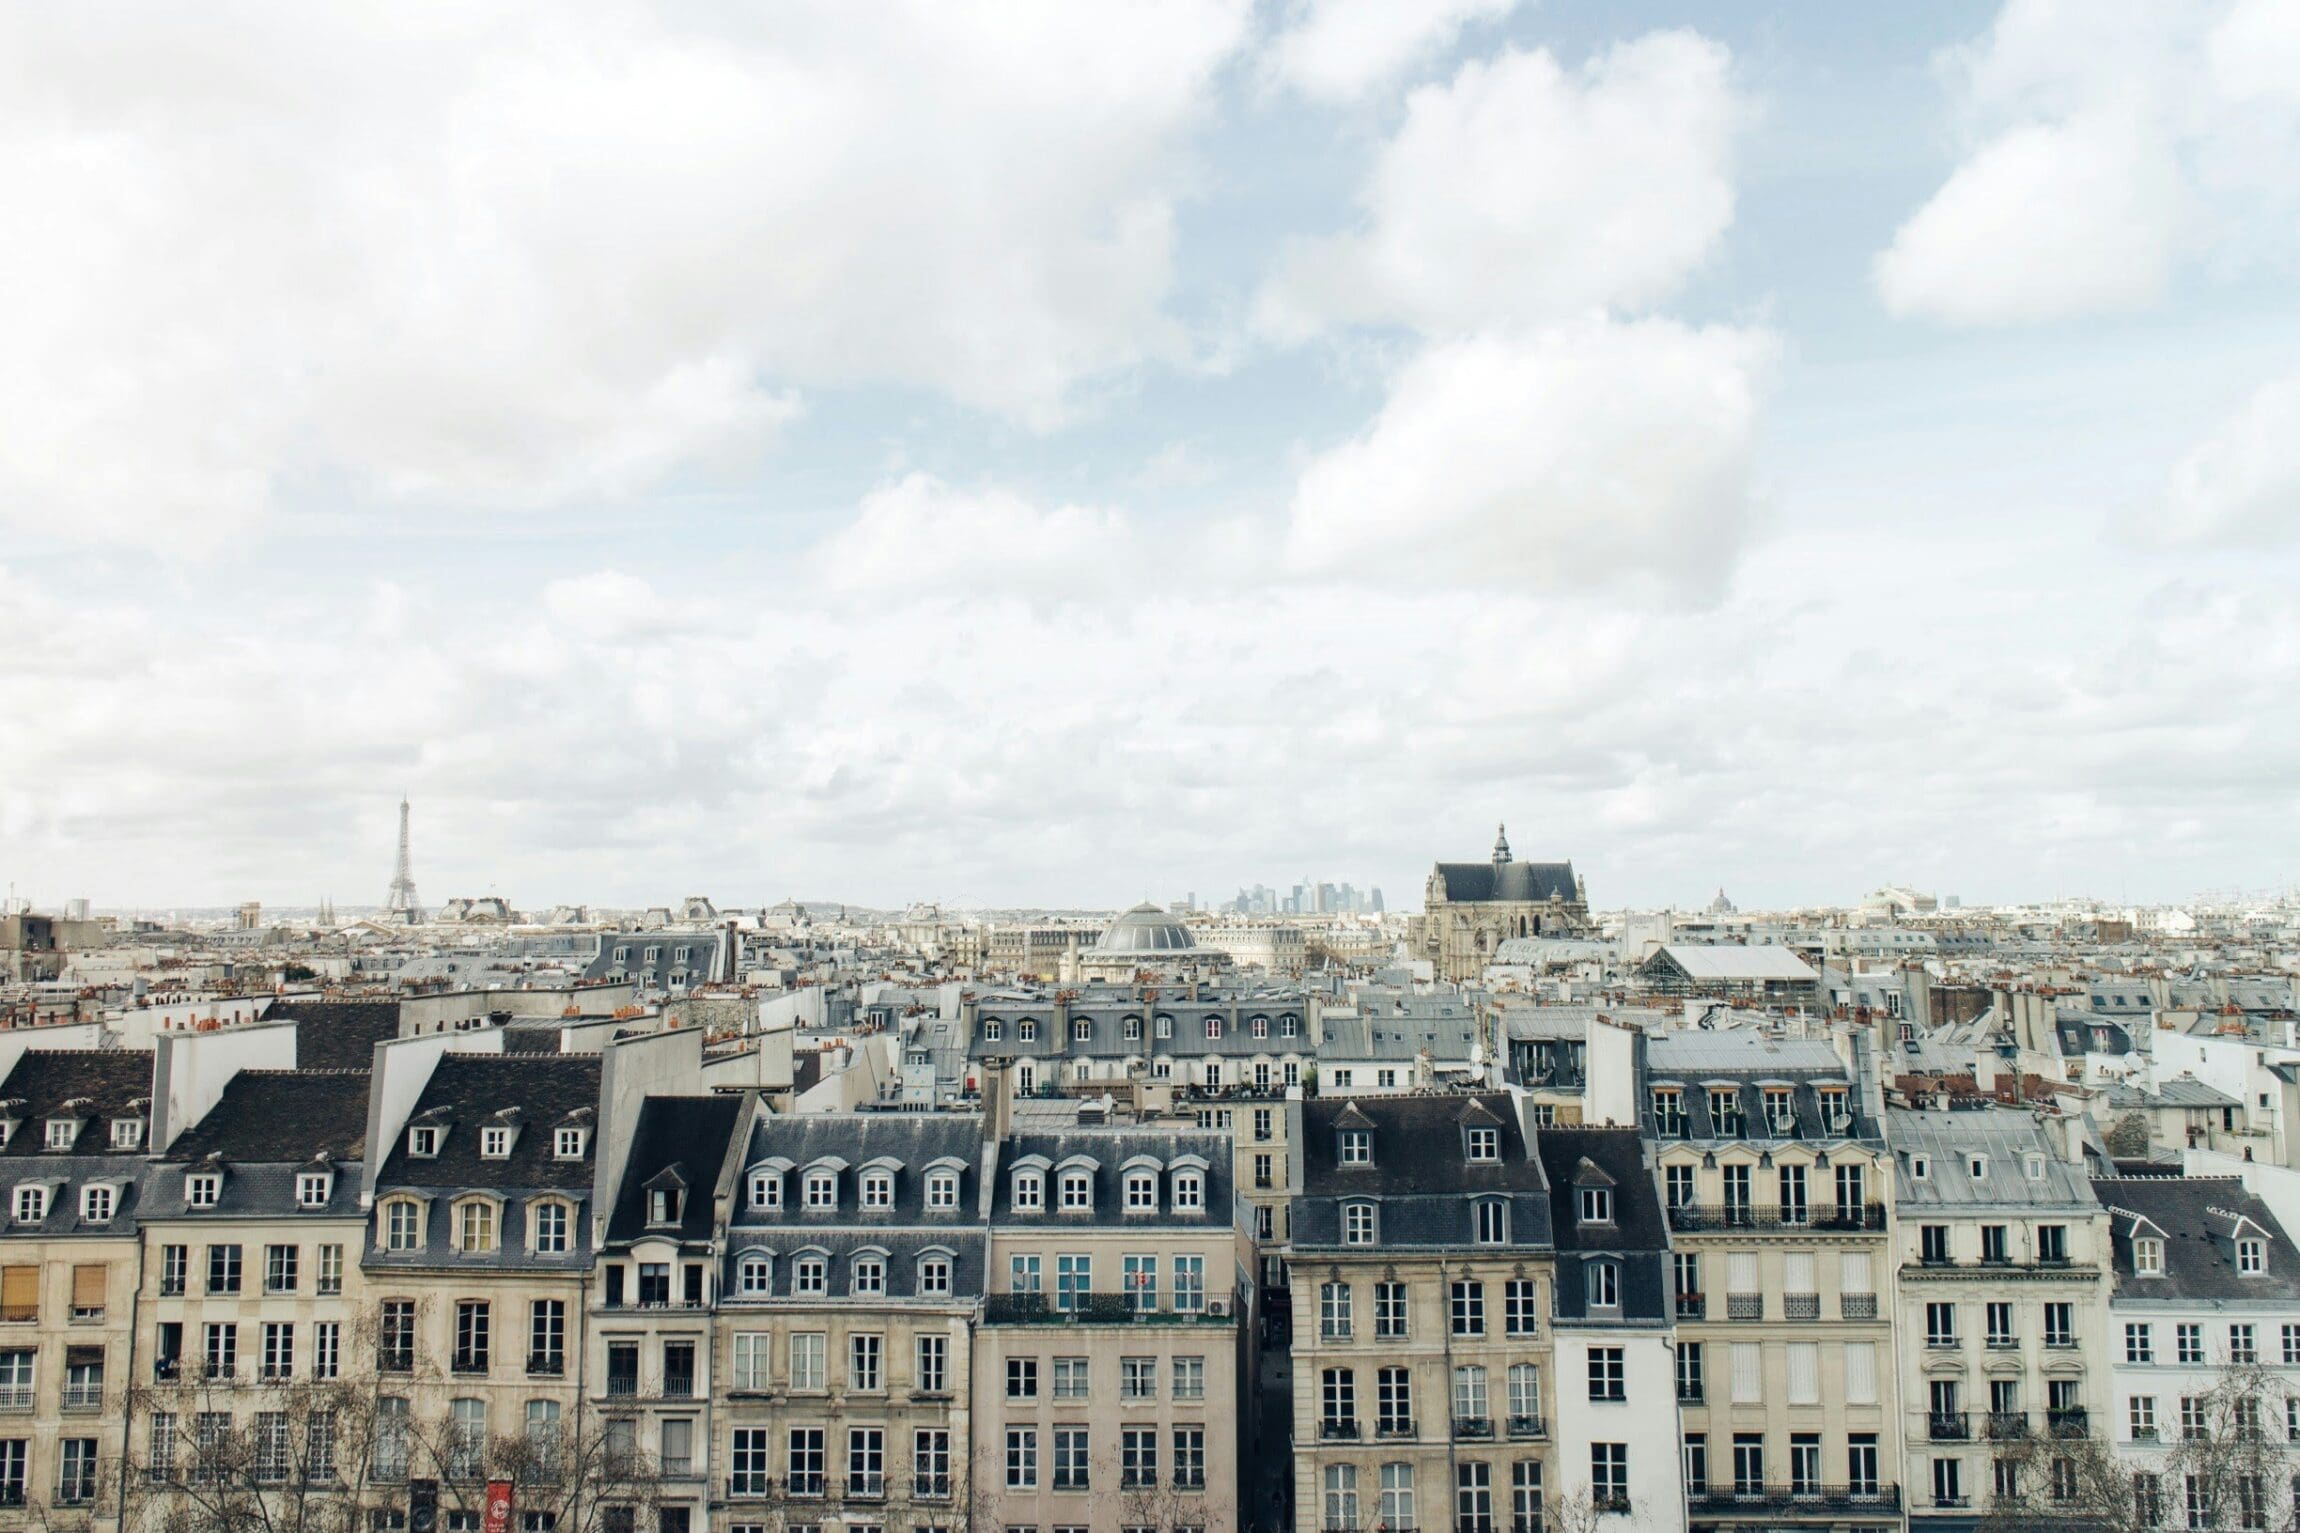 A view of Parisian rooftops; Photography by Nil Castellvi